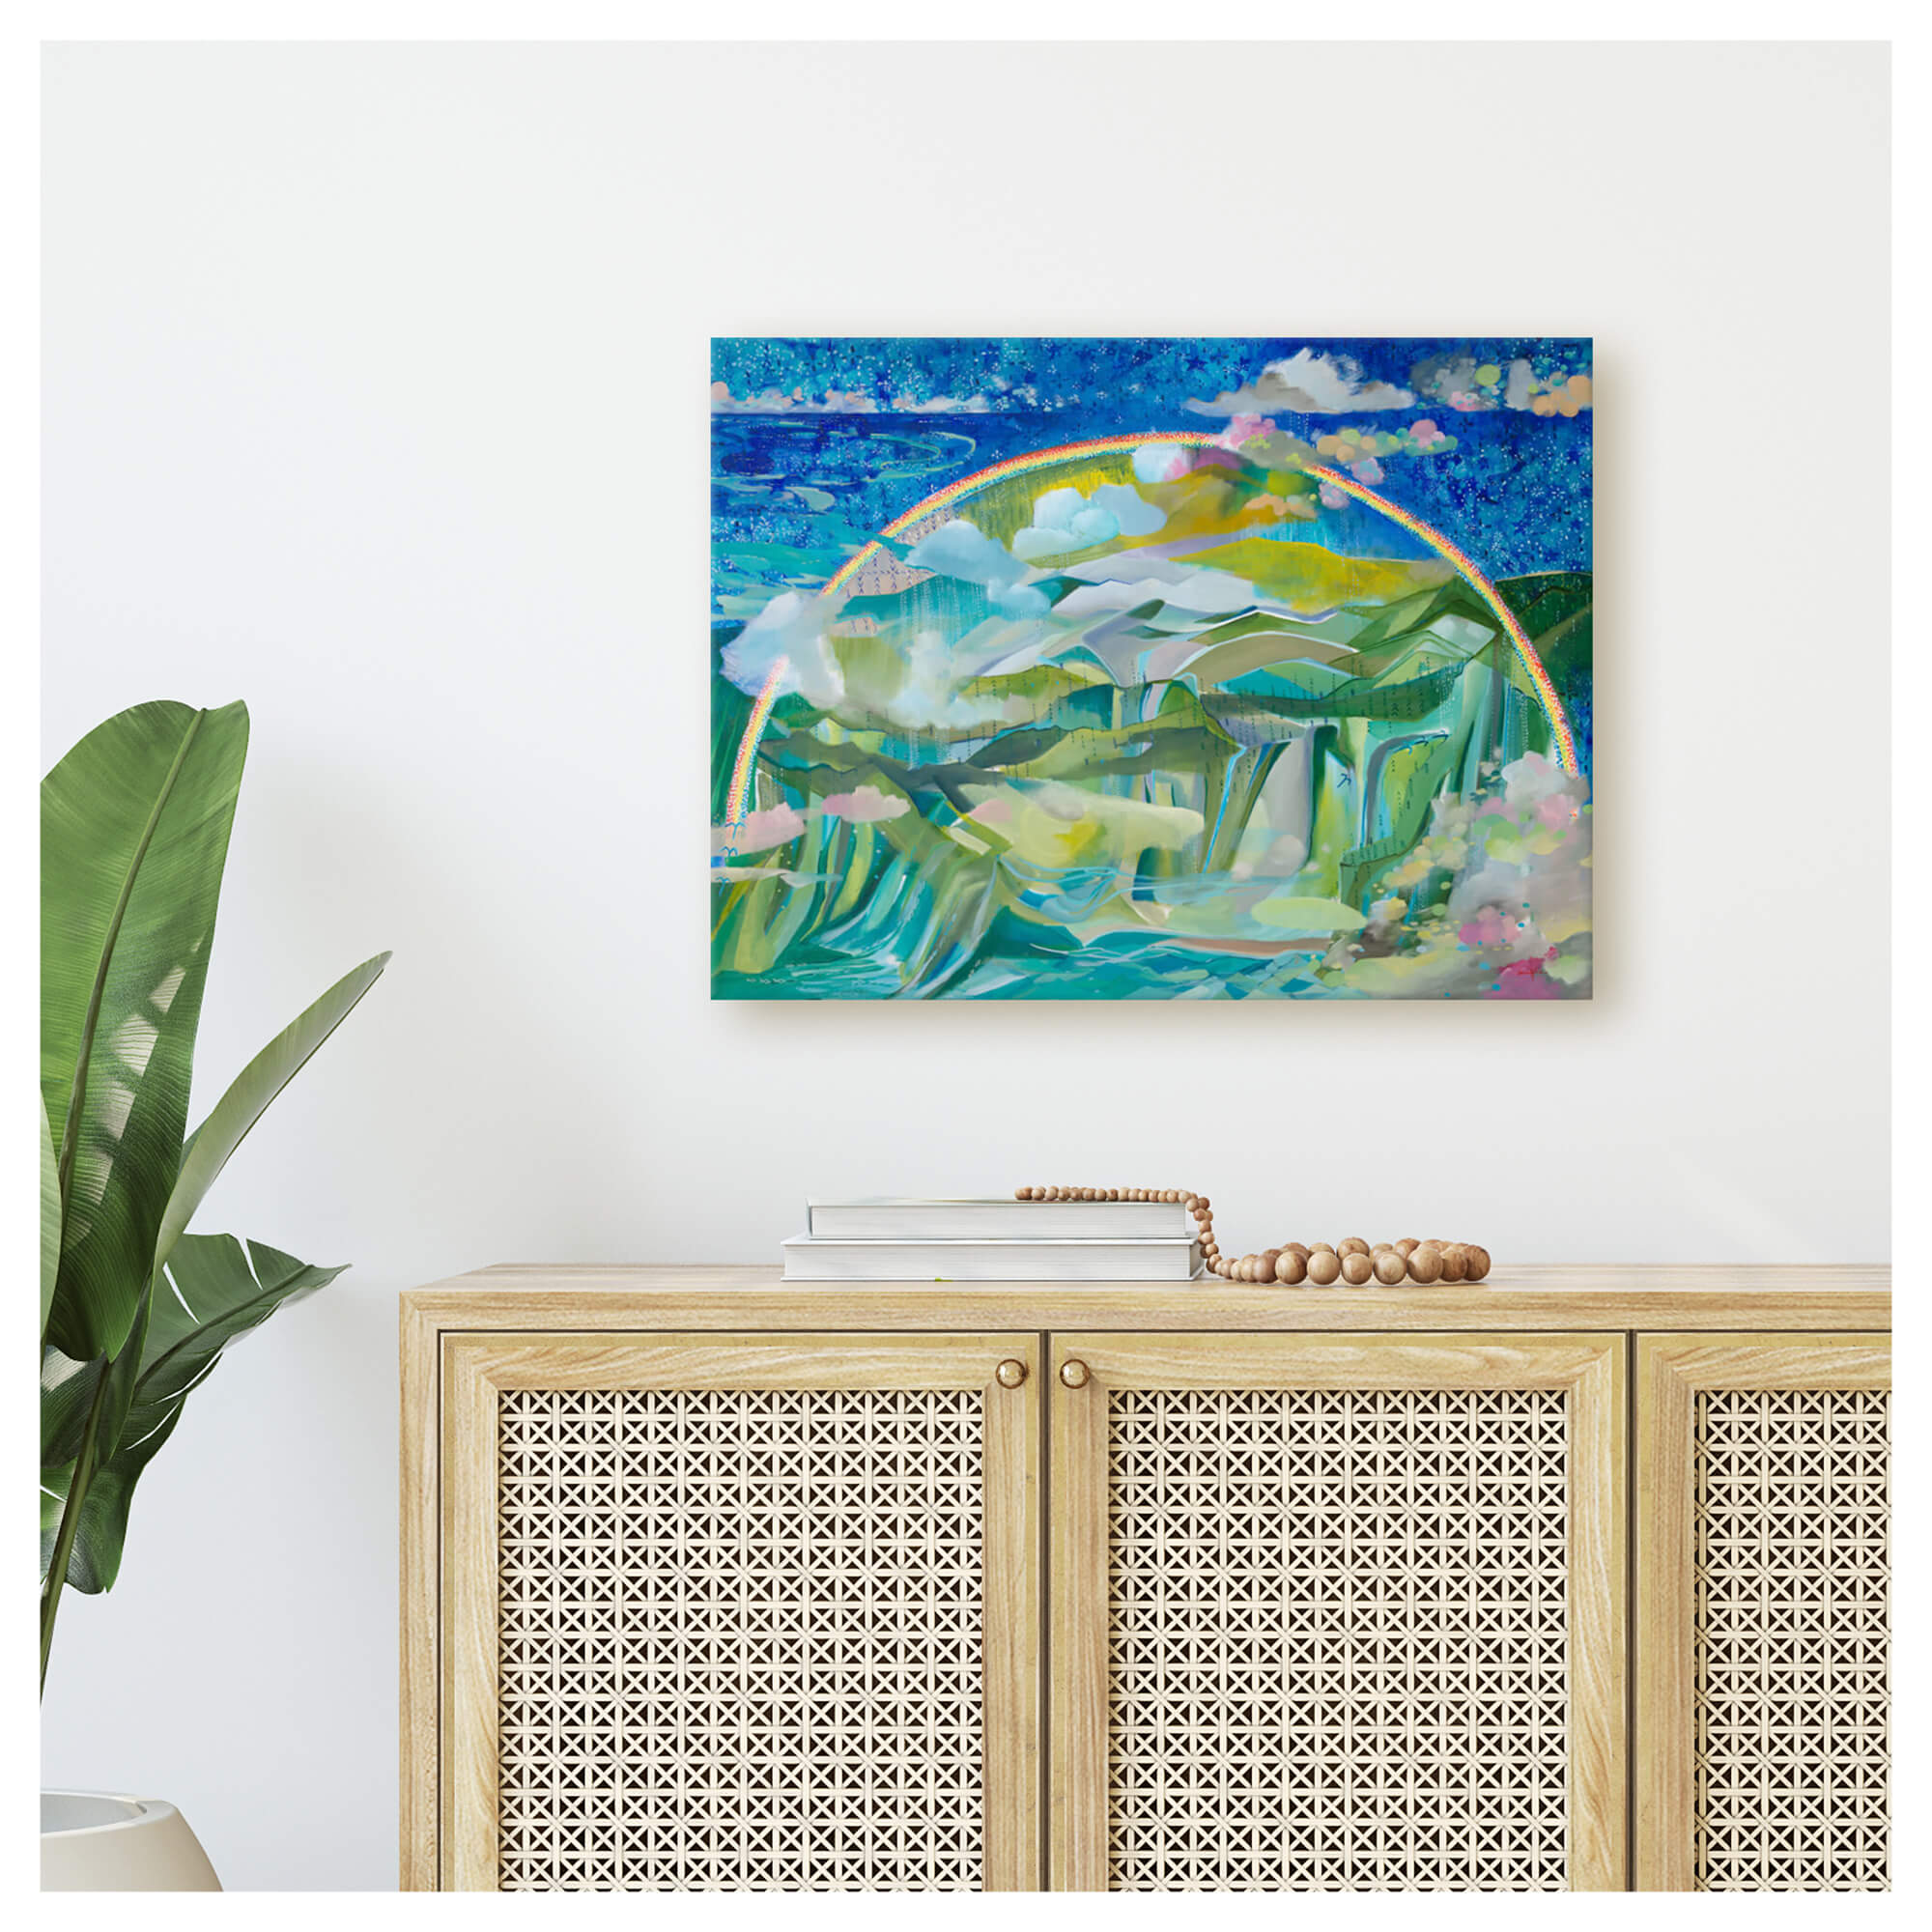 Canvas art print of an abstract landscape with a rainbow over the mountains by Hawaii artist Saumolia Puapuaga